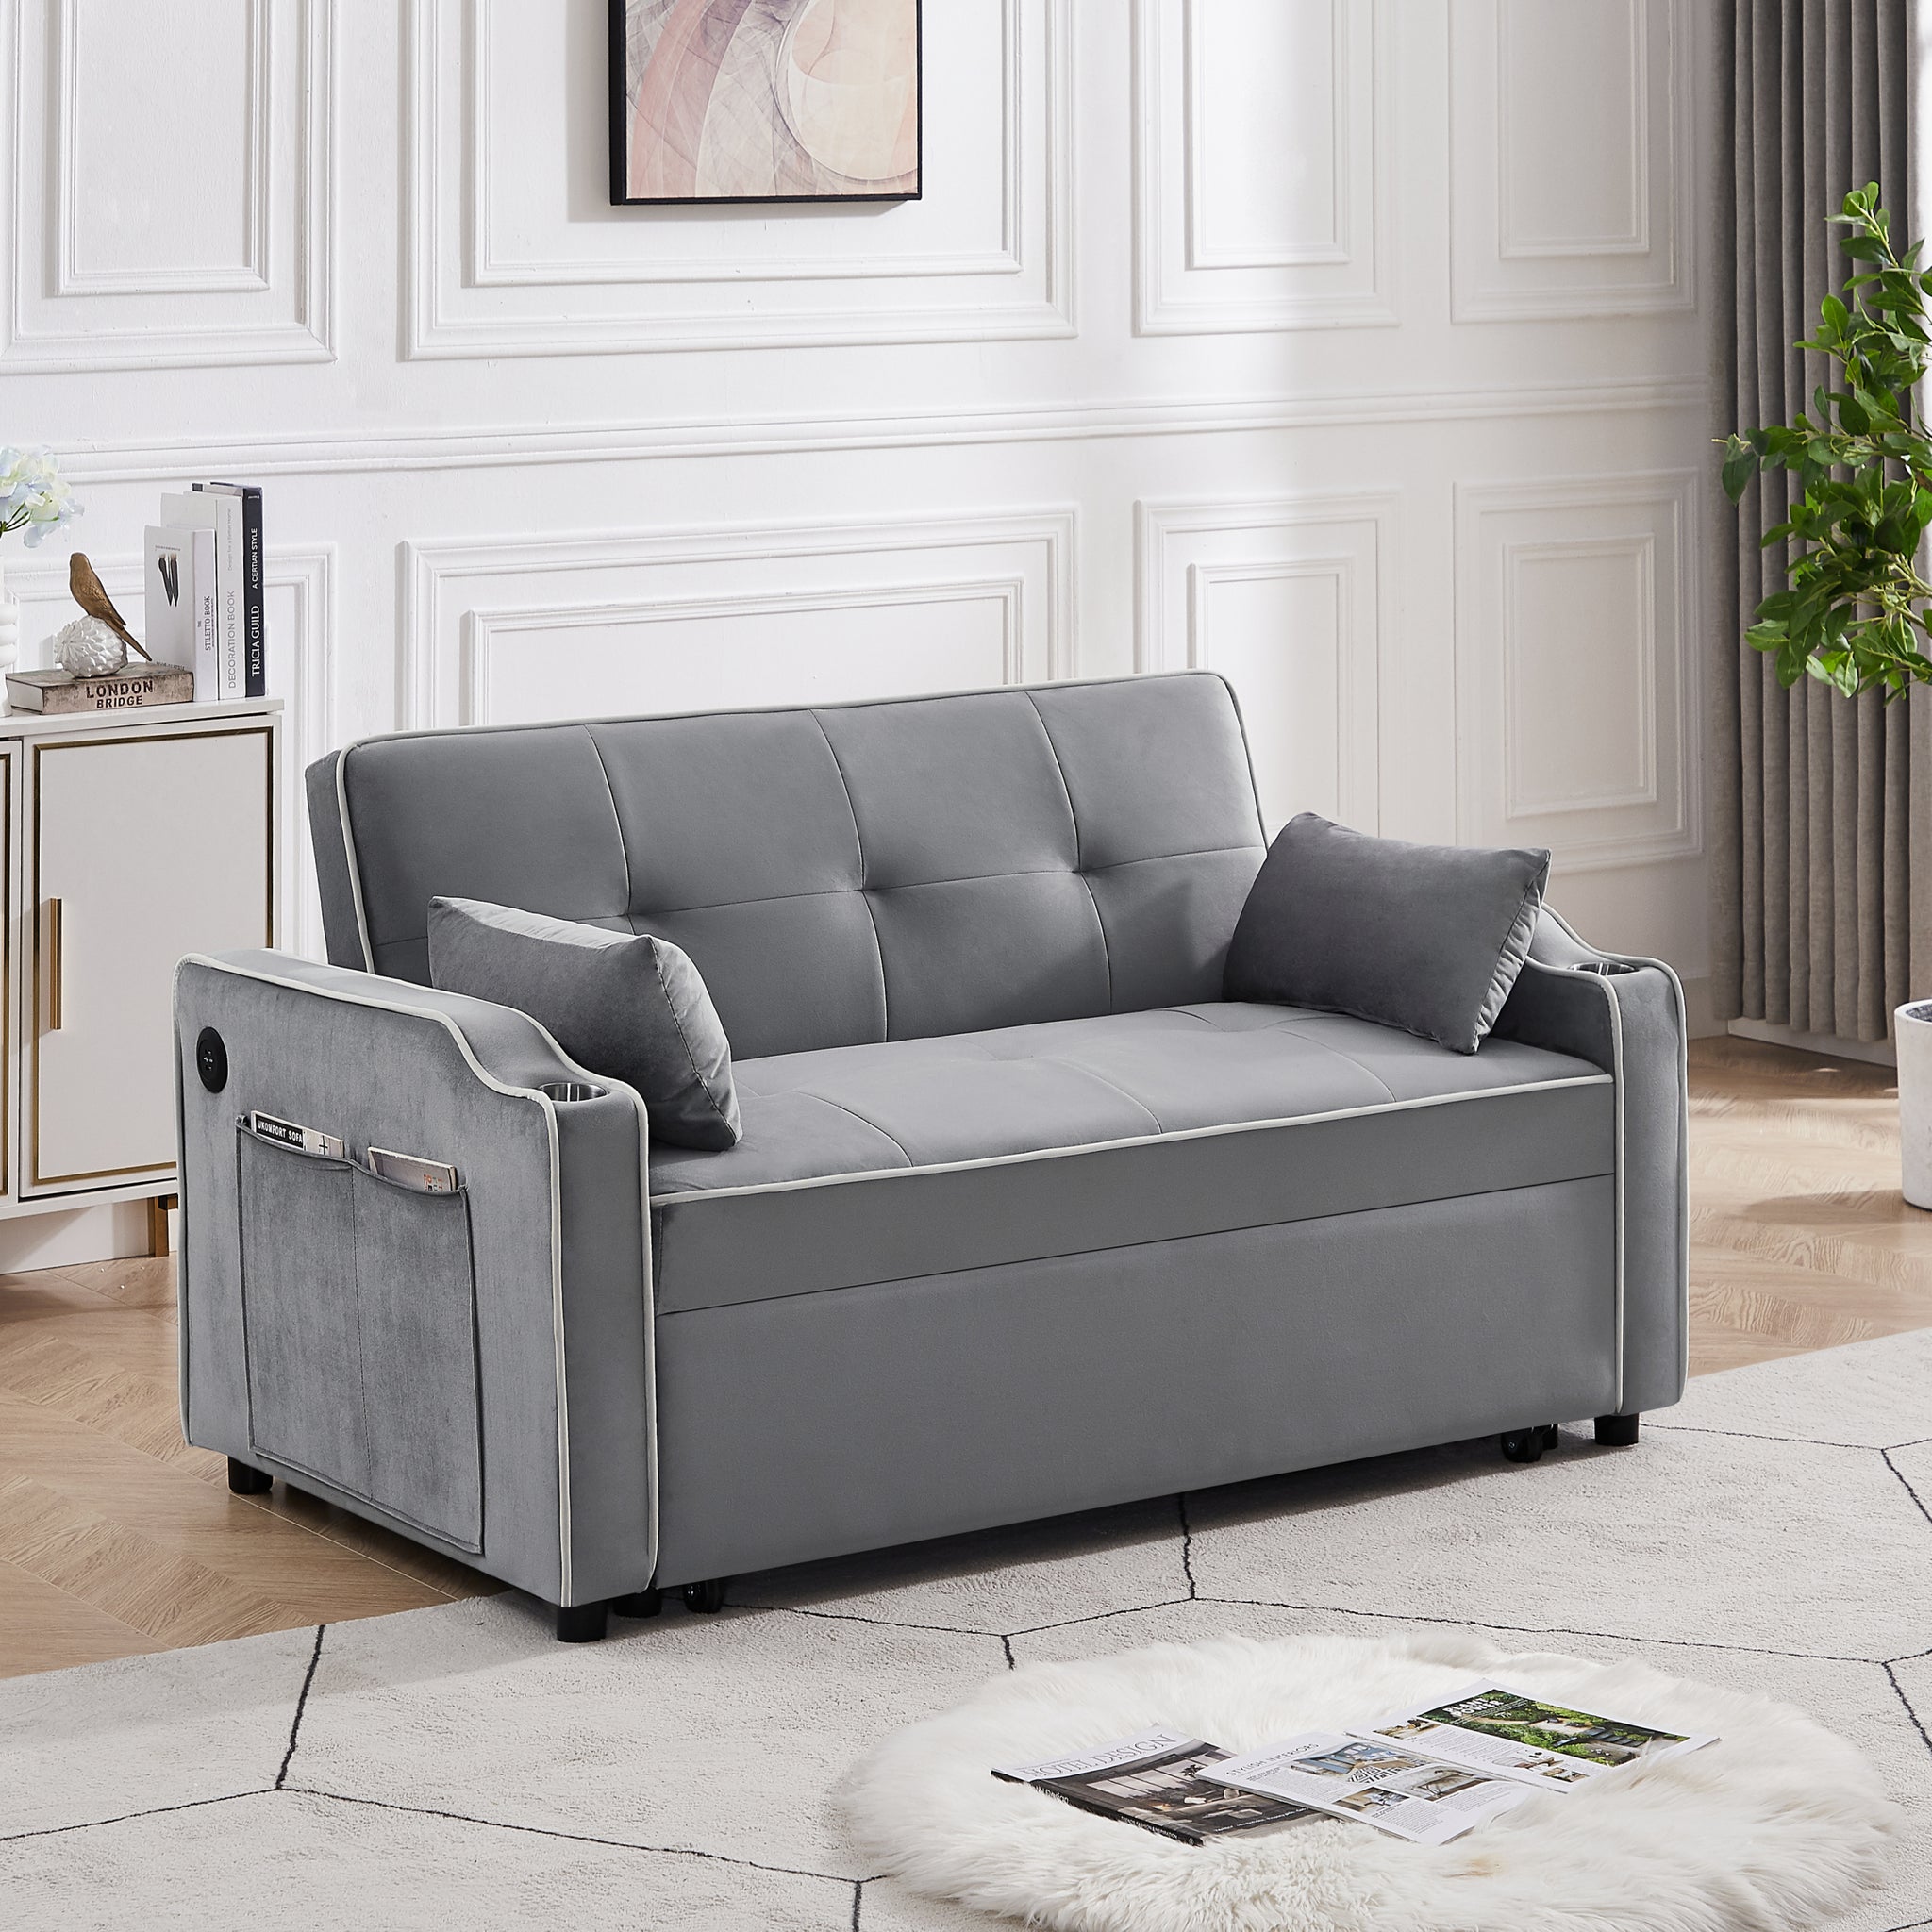 Sofa Bed, 3 in 1 Convertible Sofa Chair Bed gray-velvet